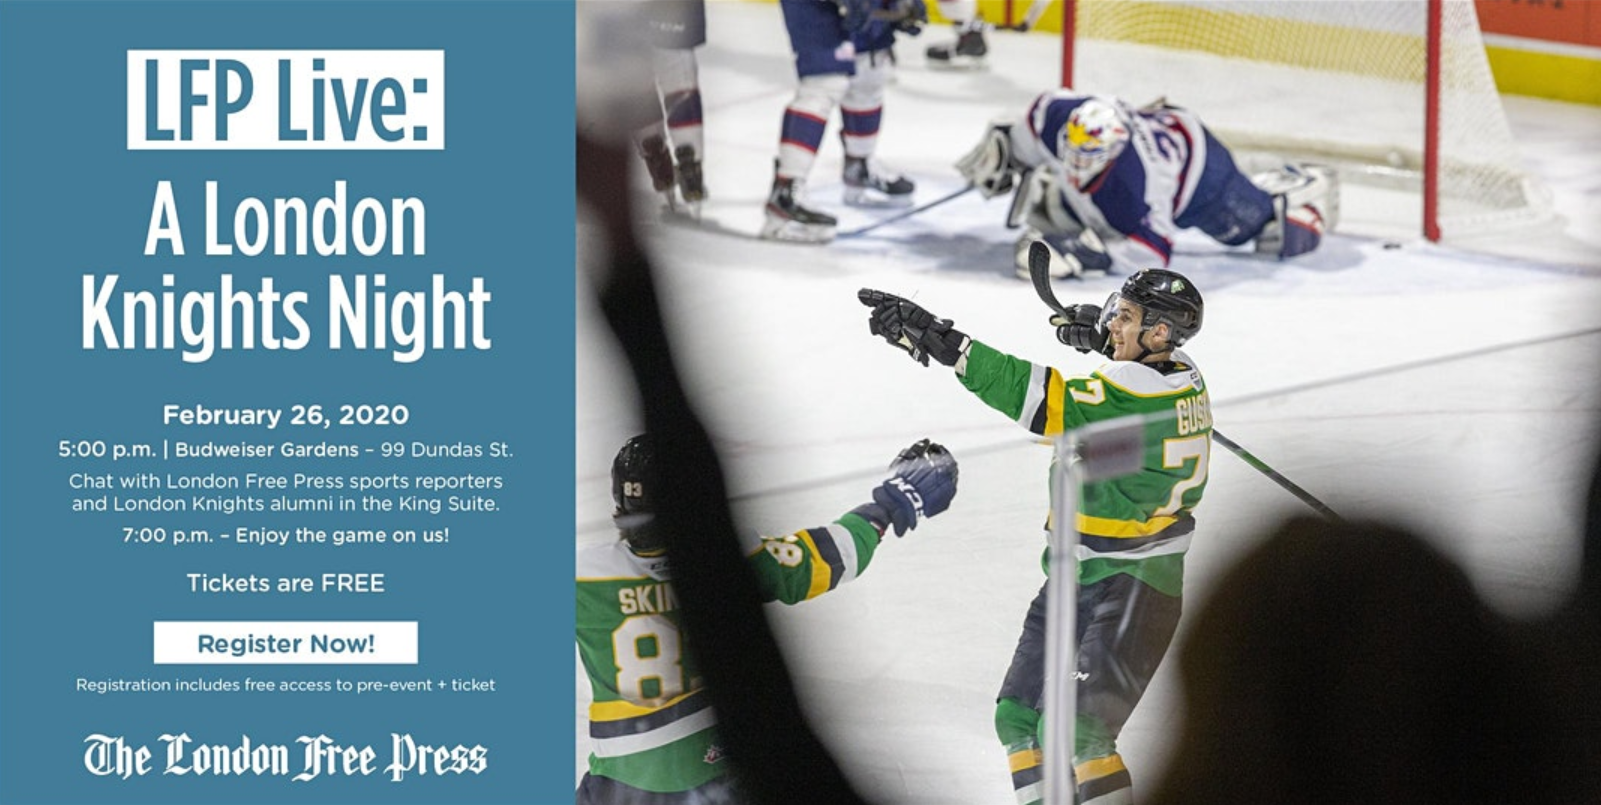 LFP LIVE A London Knights Night at Budweiser Gardens sells out in just 12 hours London Free Press